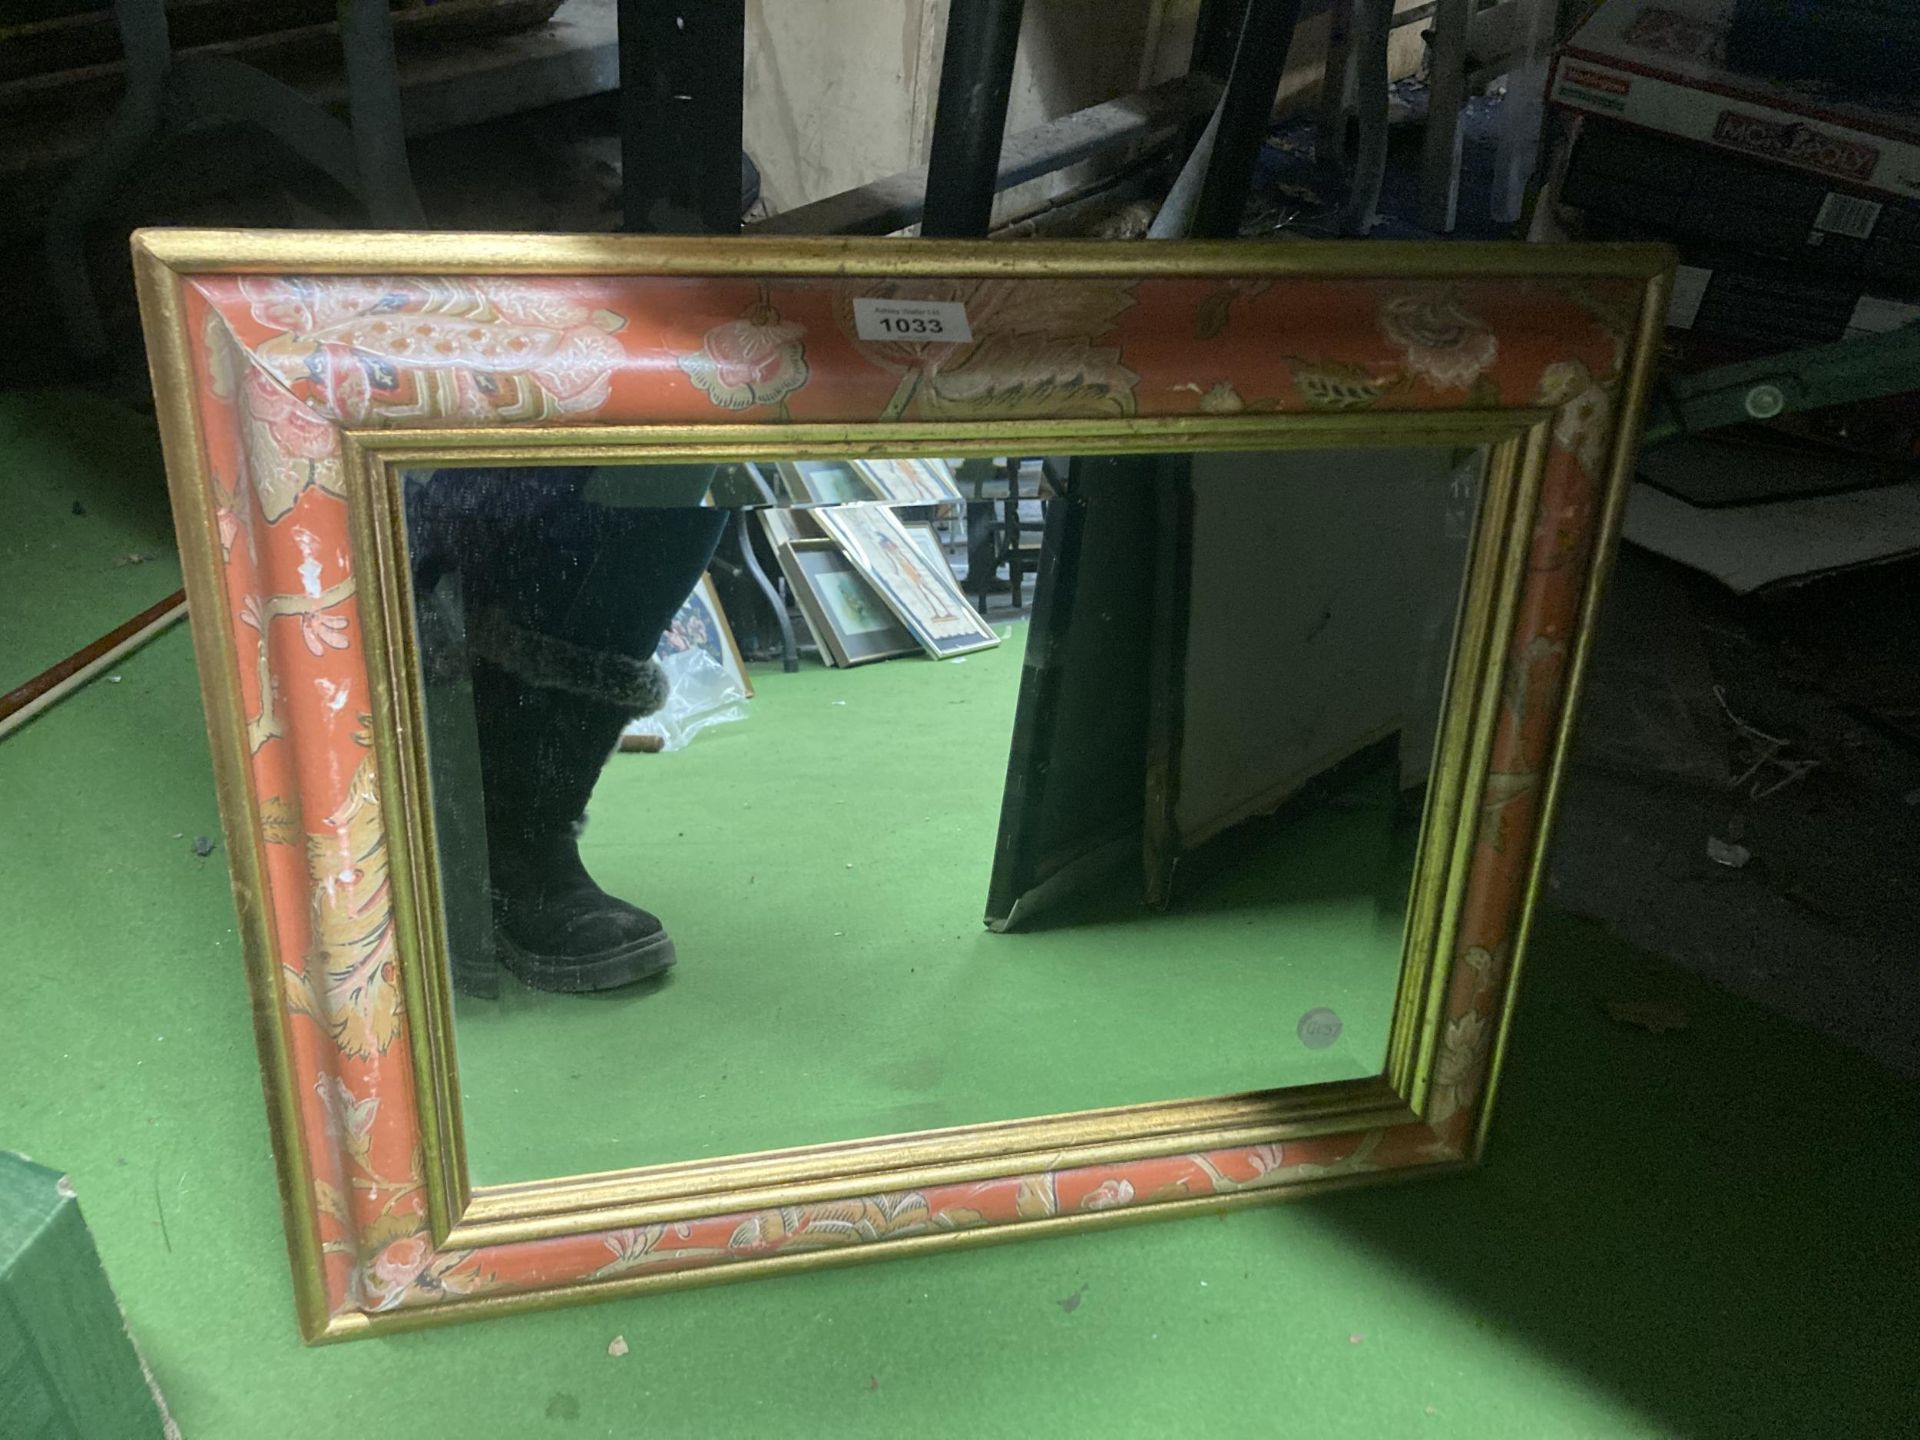 A BEVELLED EDGE MIRROR WITH FLORAL FRAME, 53CM X 43CM